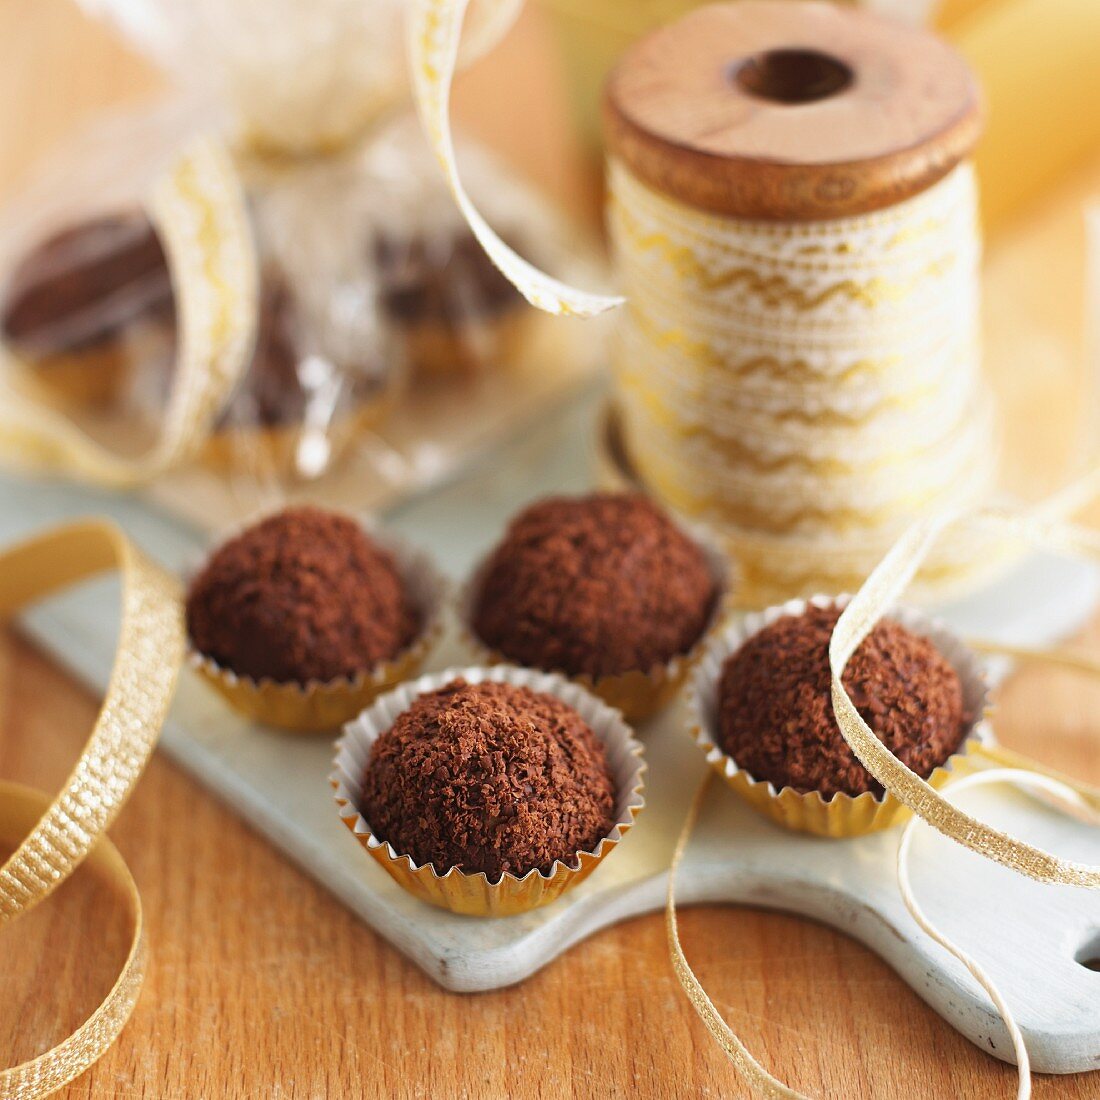 Chocolate truffles for gifting